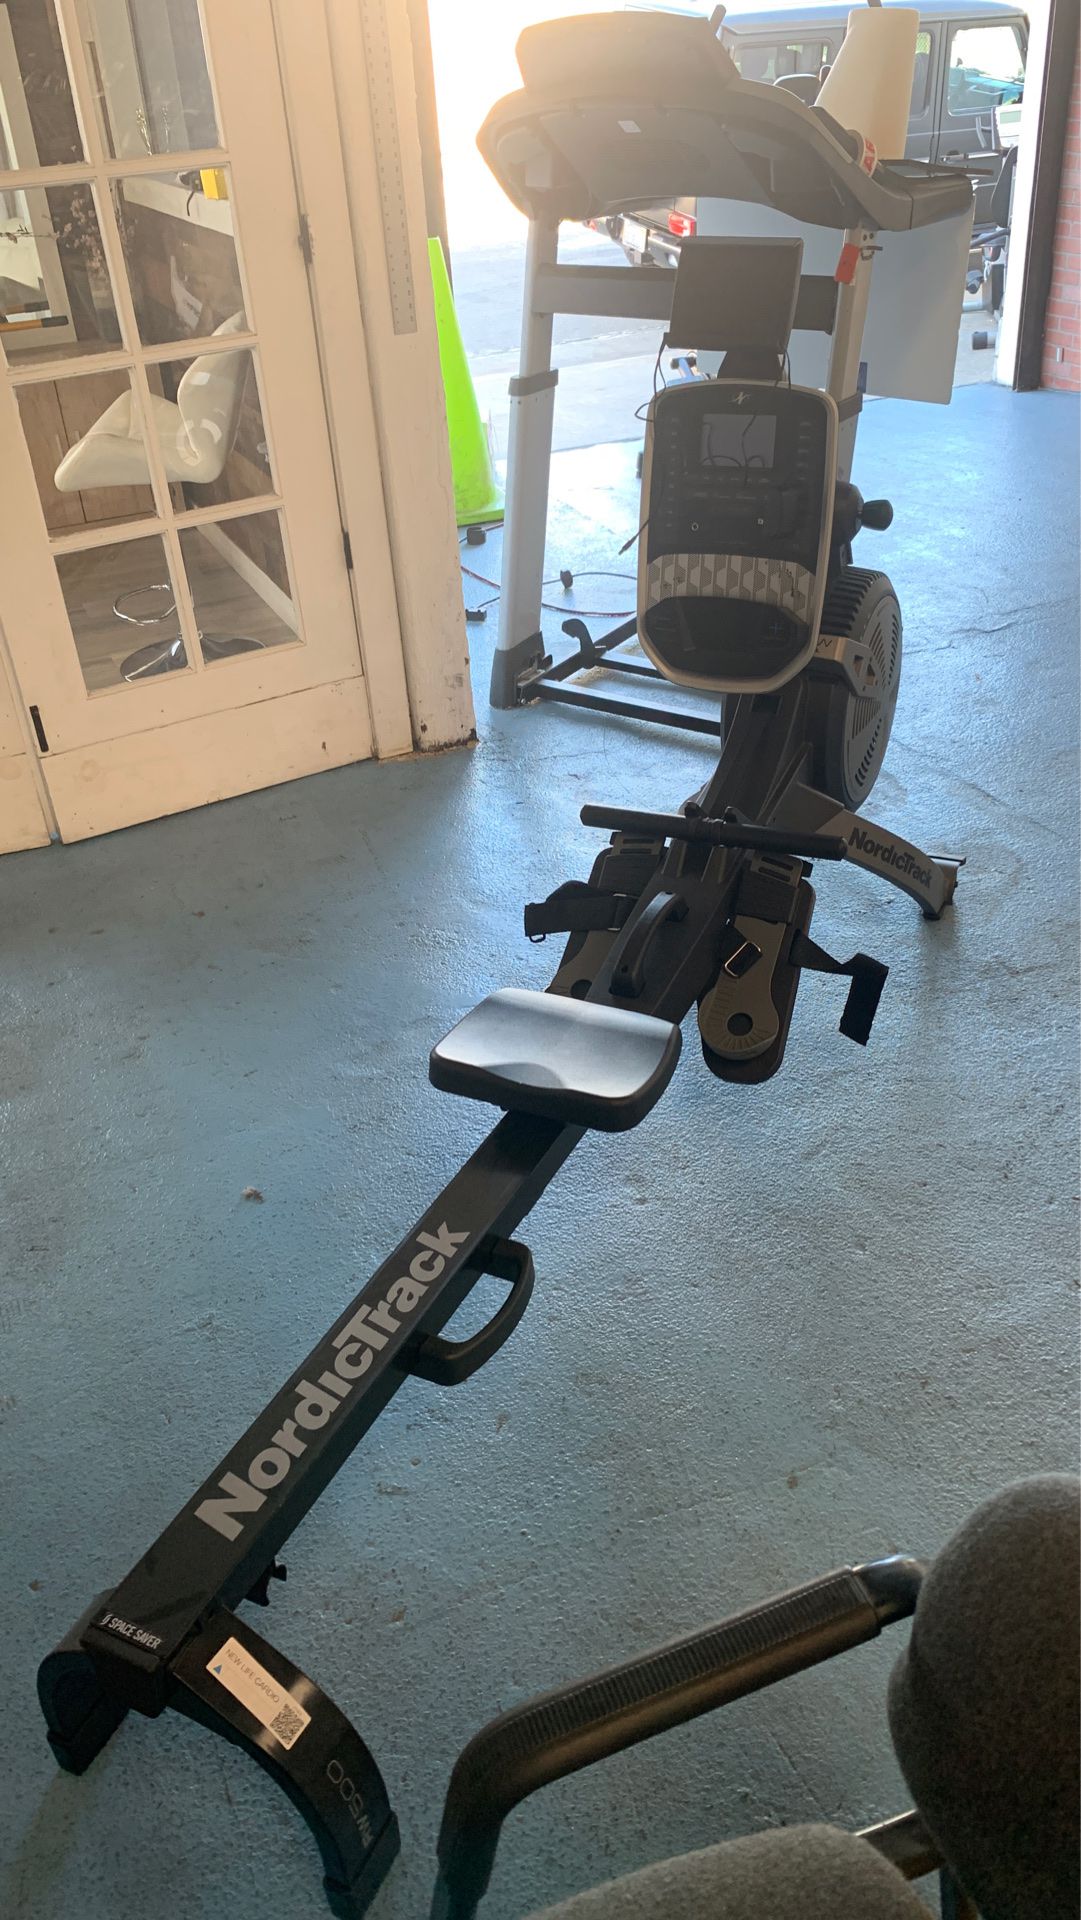 Rowing Machine!! NOW 50% off the retail price!! 3yr warranty included!!